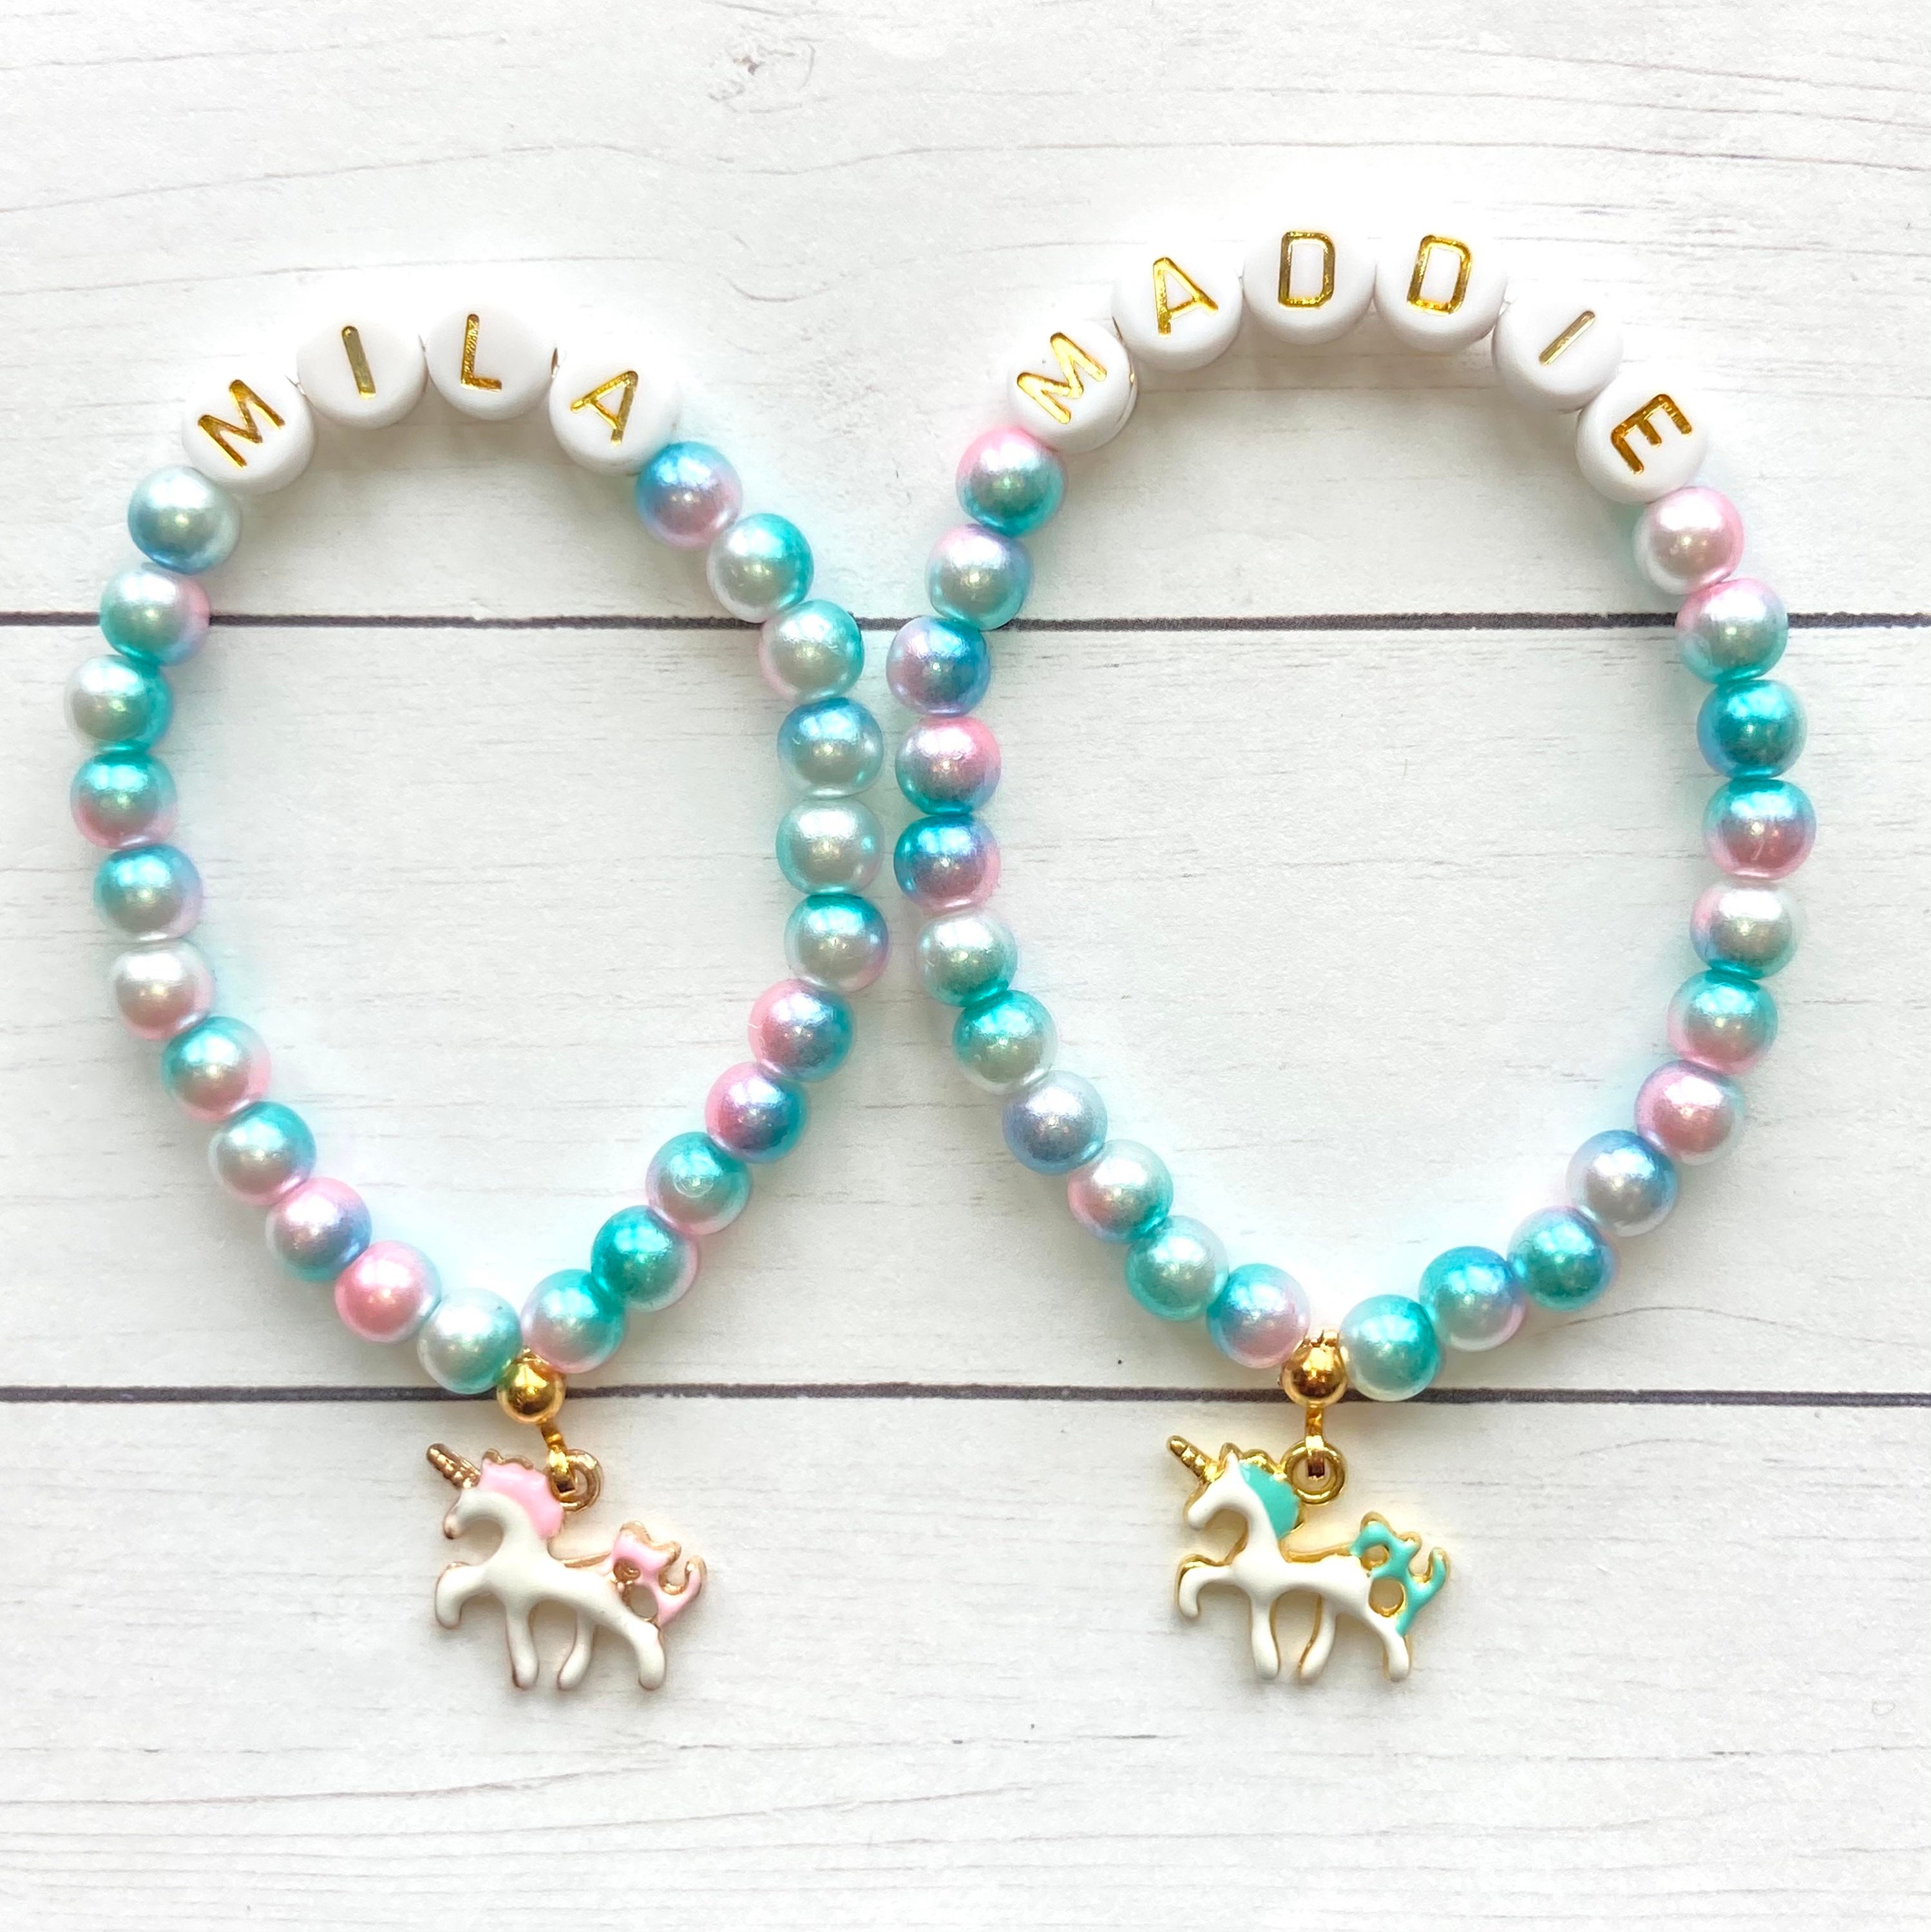 Heart Necklace Set, Personalized Gift for Girls, Name Jewelry, Name  Bracelet, Bracelet Set, Jewelry for Toddler, Girls Accessories 